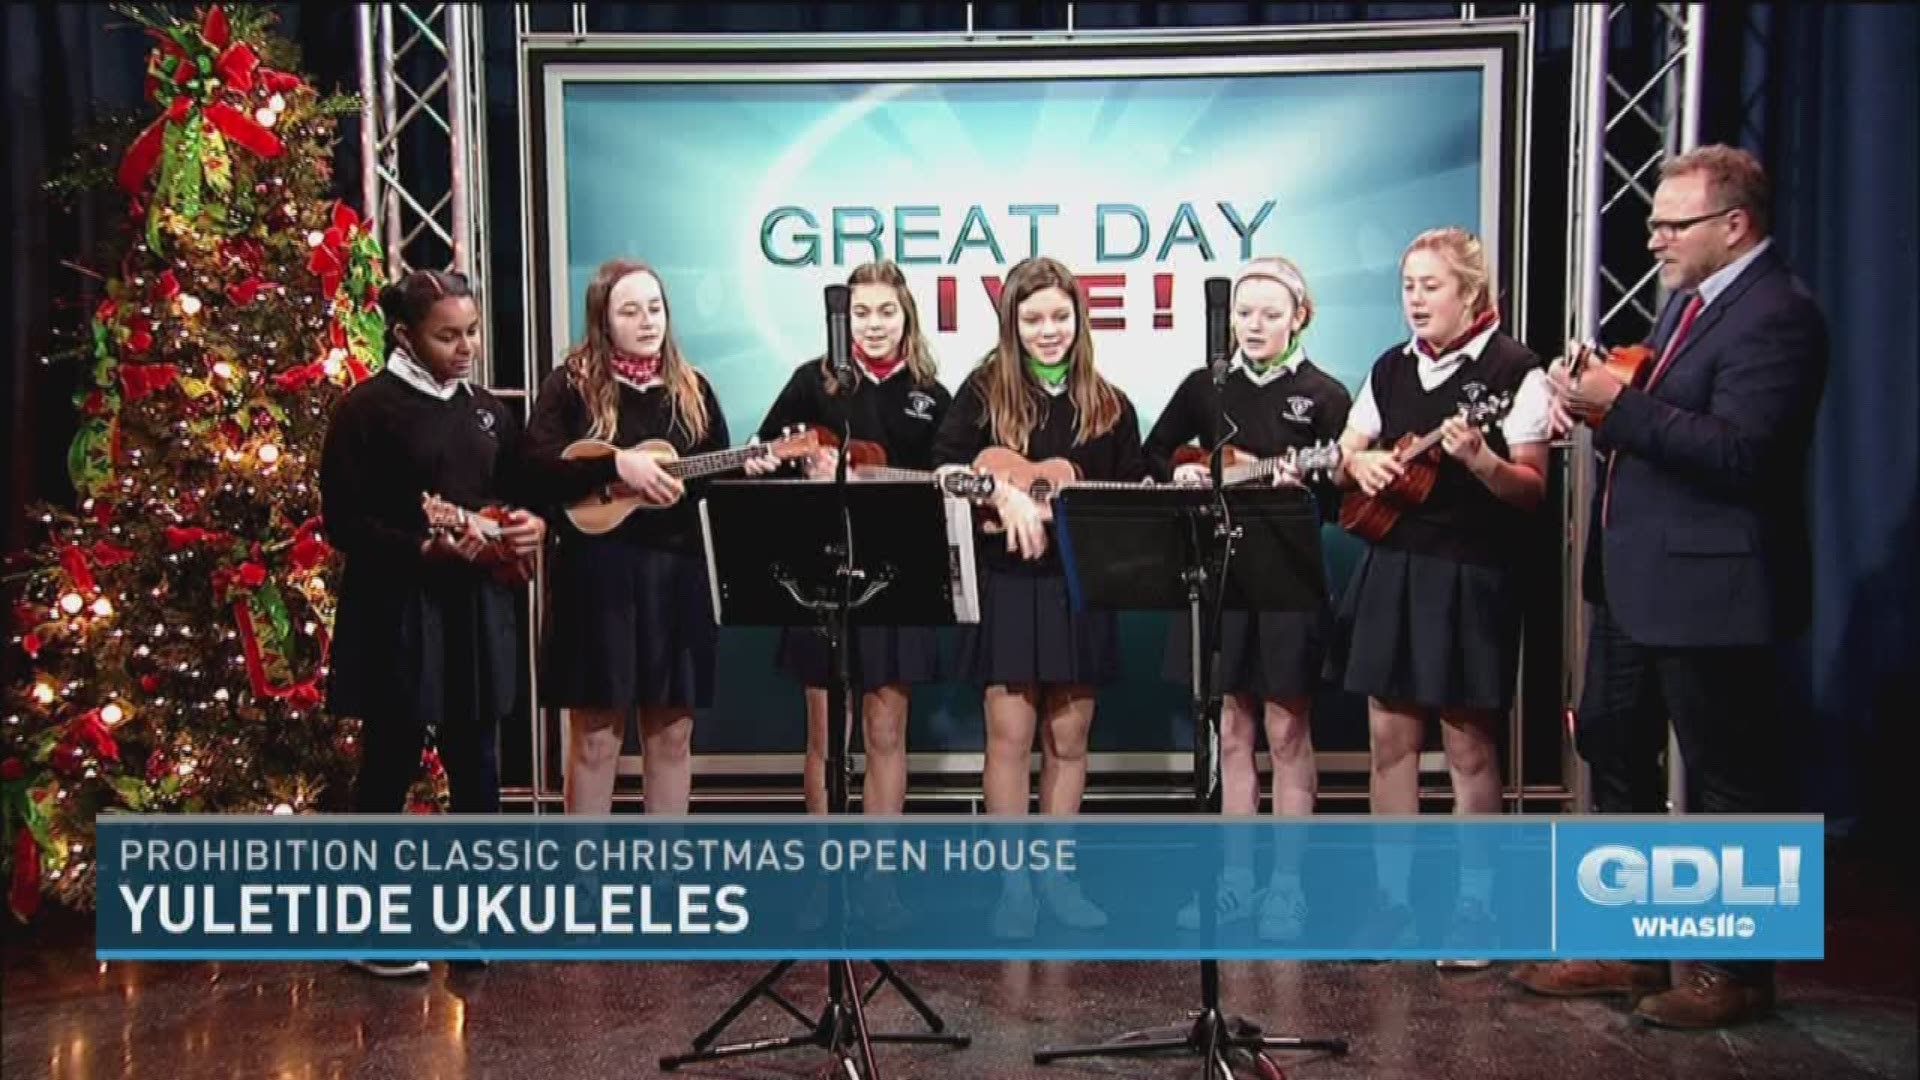 Students from Sacred Heart perform as the Yuletide Ukuleles.